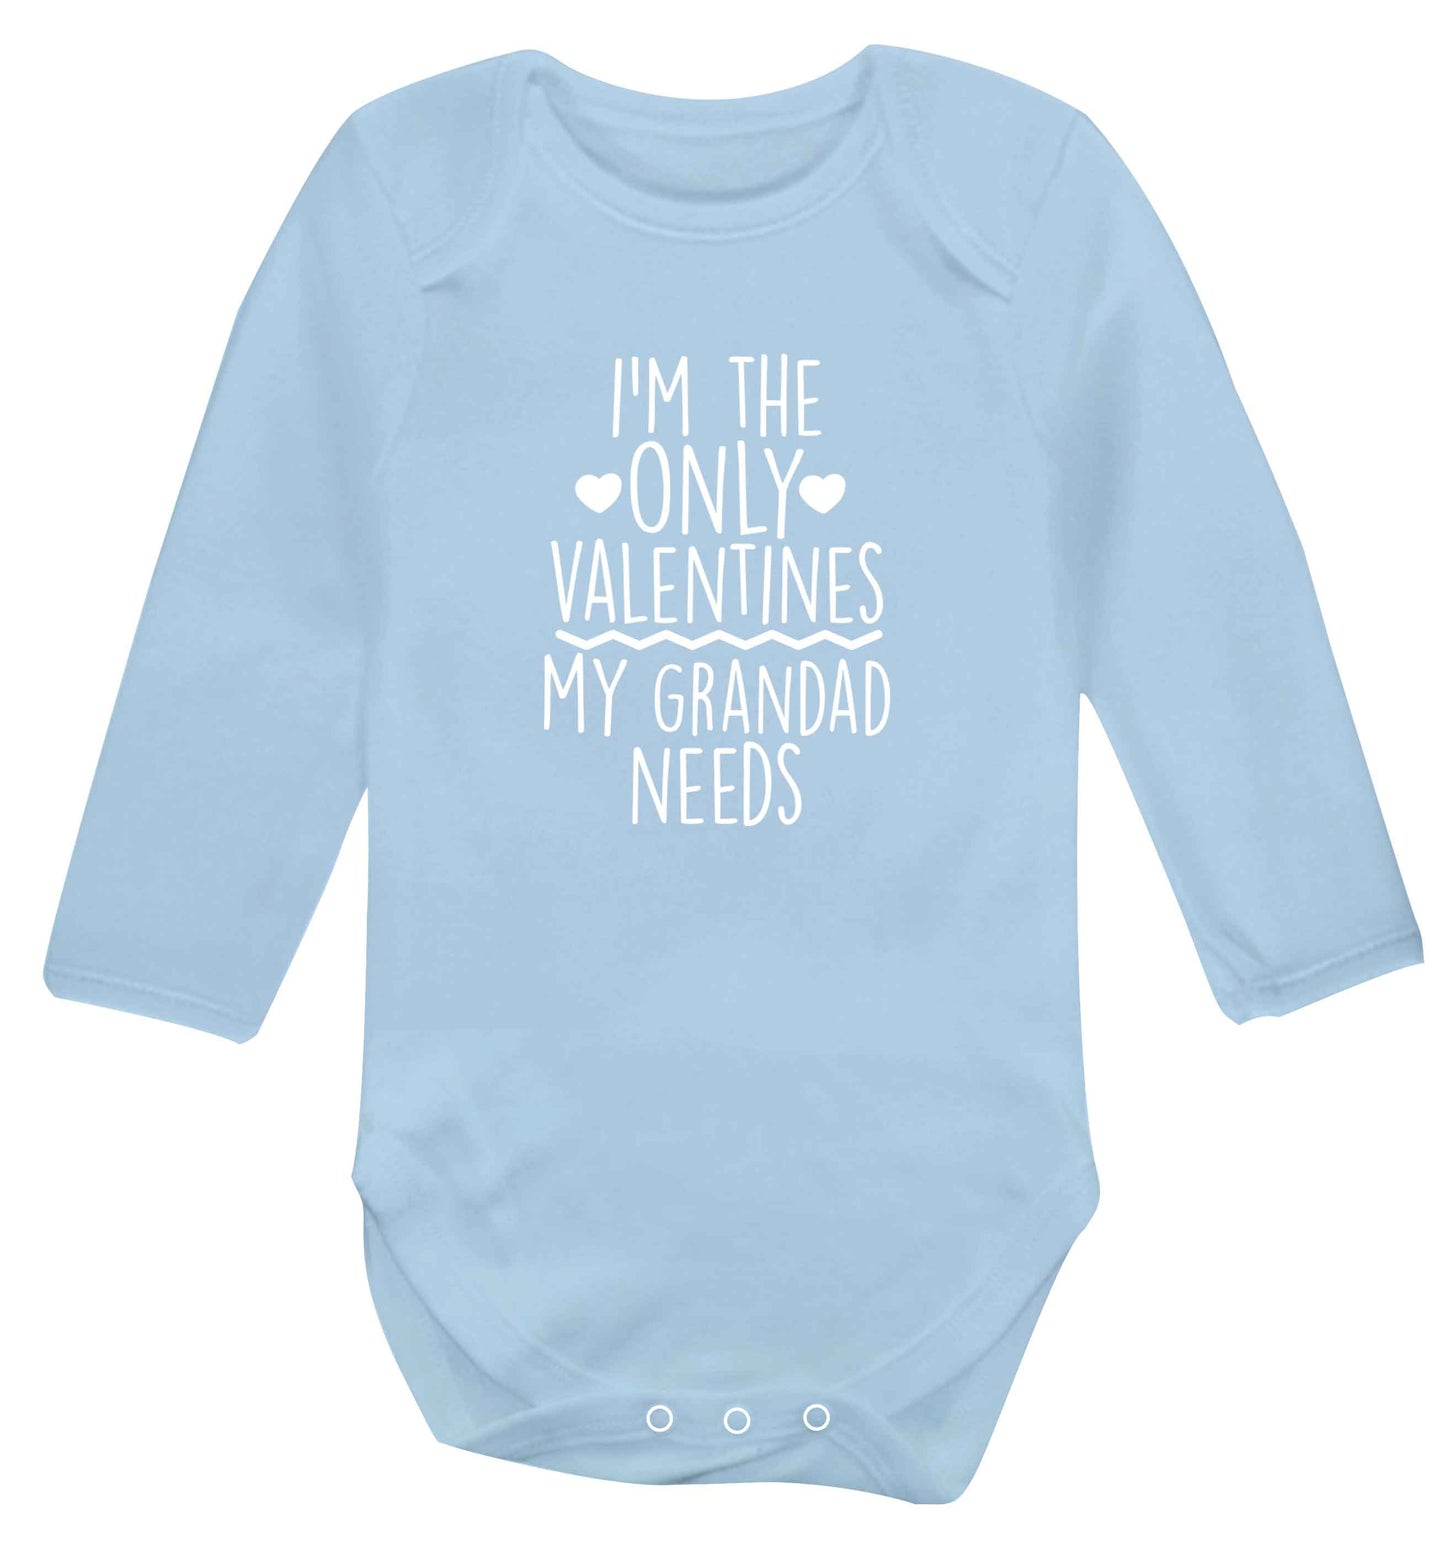 I'm the only valentines my grandad needs baby vest long sleeved pale blue 6-12 months